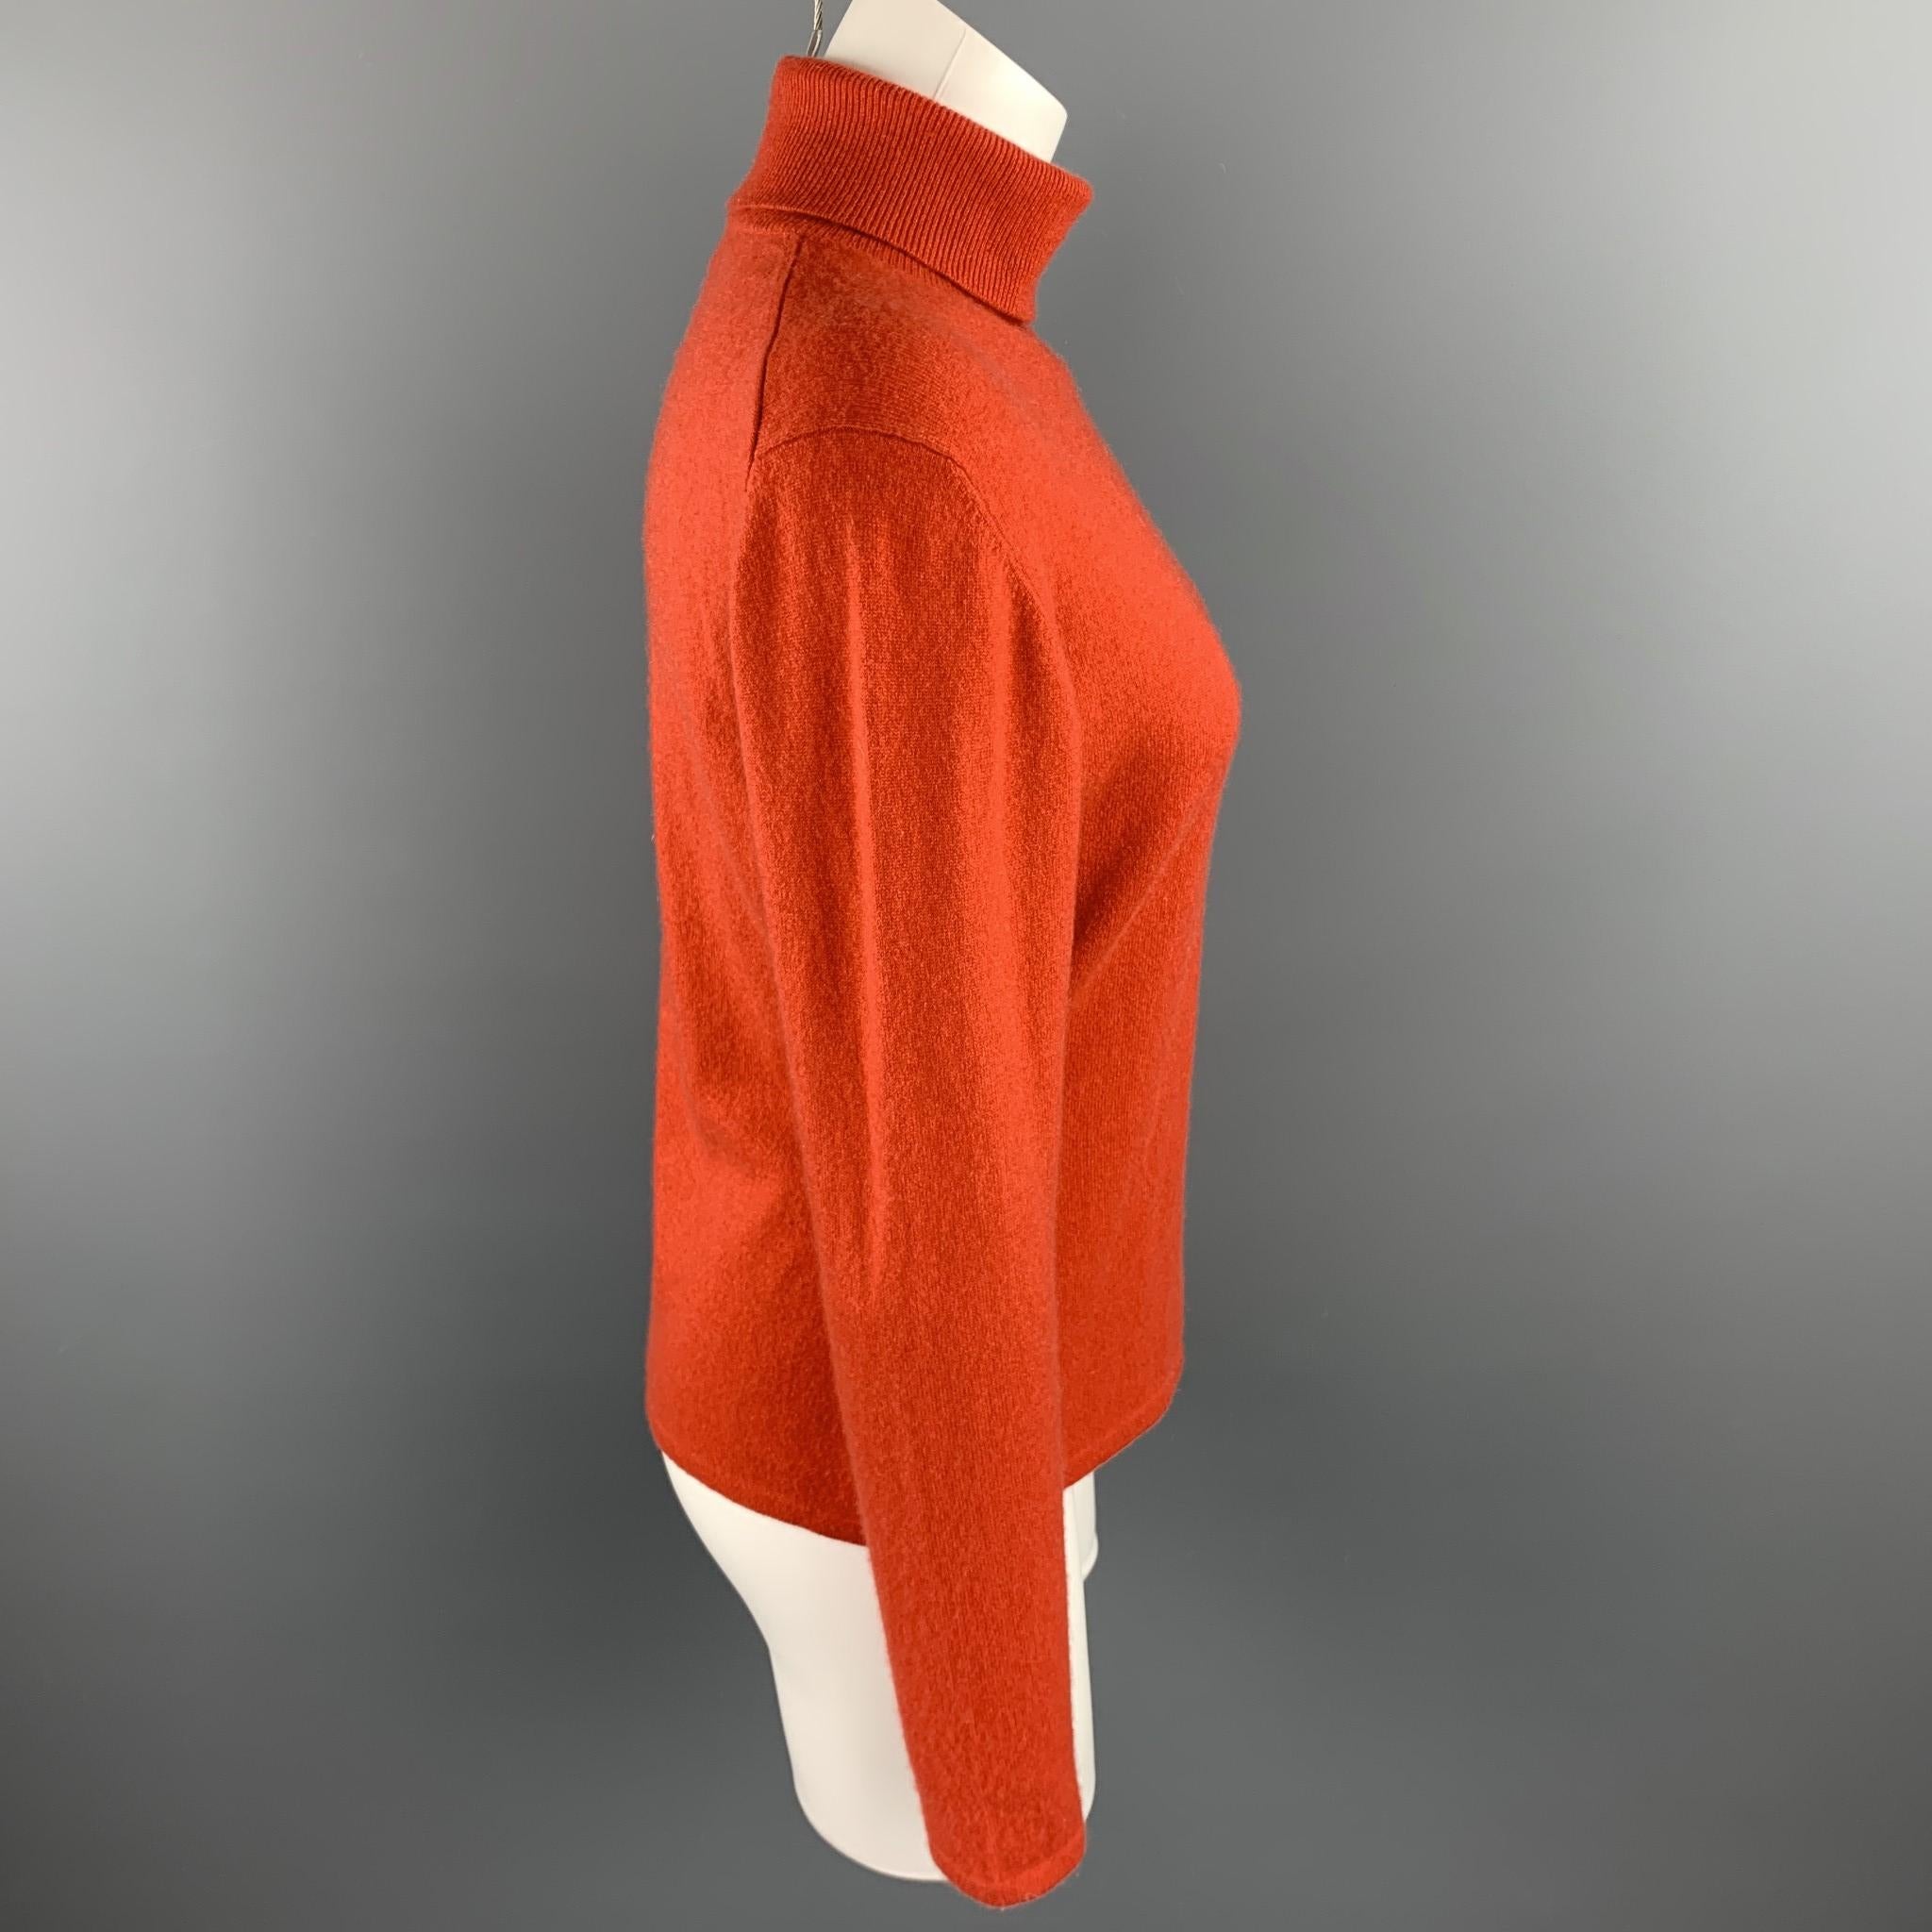 TSE sweater comes in a coral knitted cashmere featuring a turtleneck style.

Very Good Pre-Owned Condition.
Marked: No size marked

Measurements:

Shoulder: 18 in. 
Bust: 38 in. 
Sleeve: 24 in. 
Length: 22 in. 

SKU: 92737
Category: Sweater

More